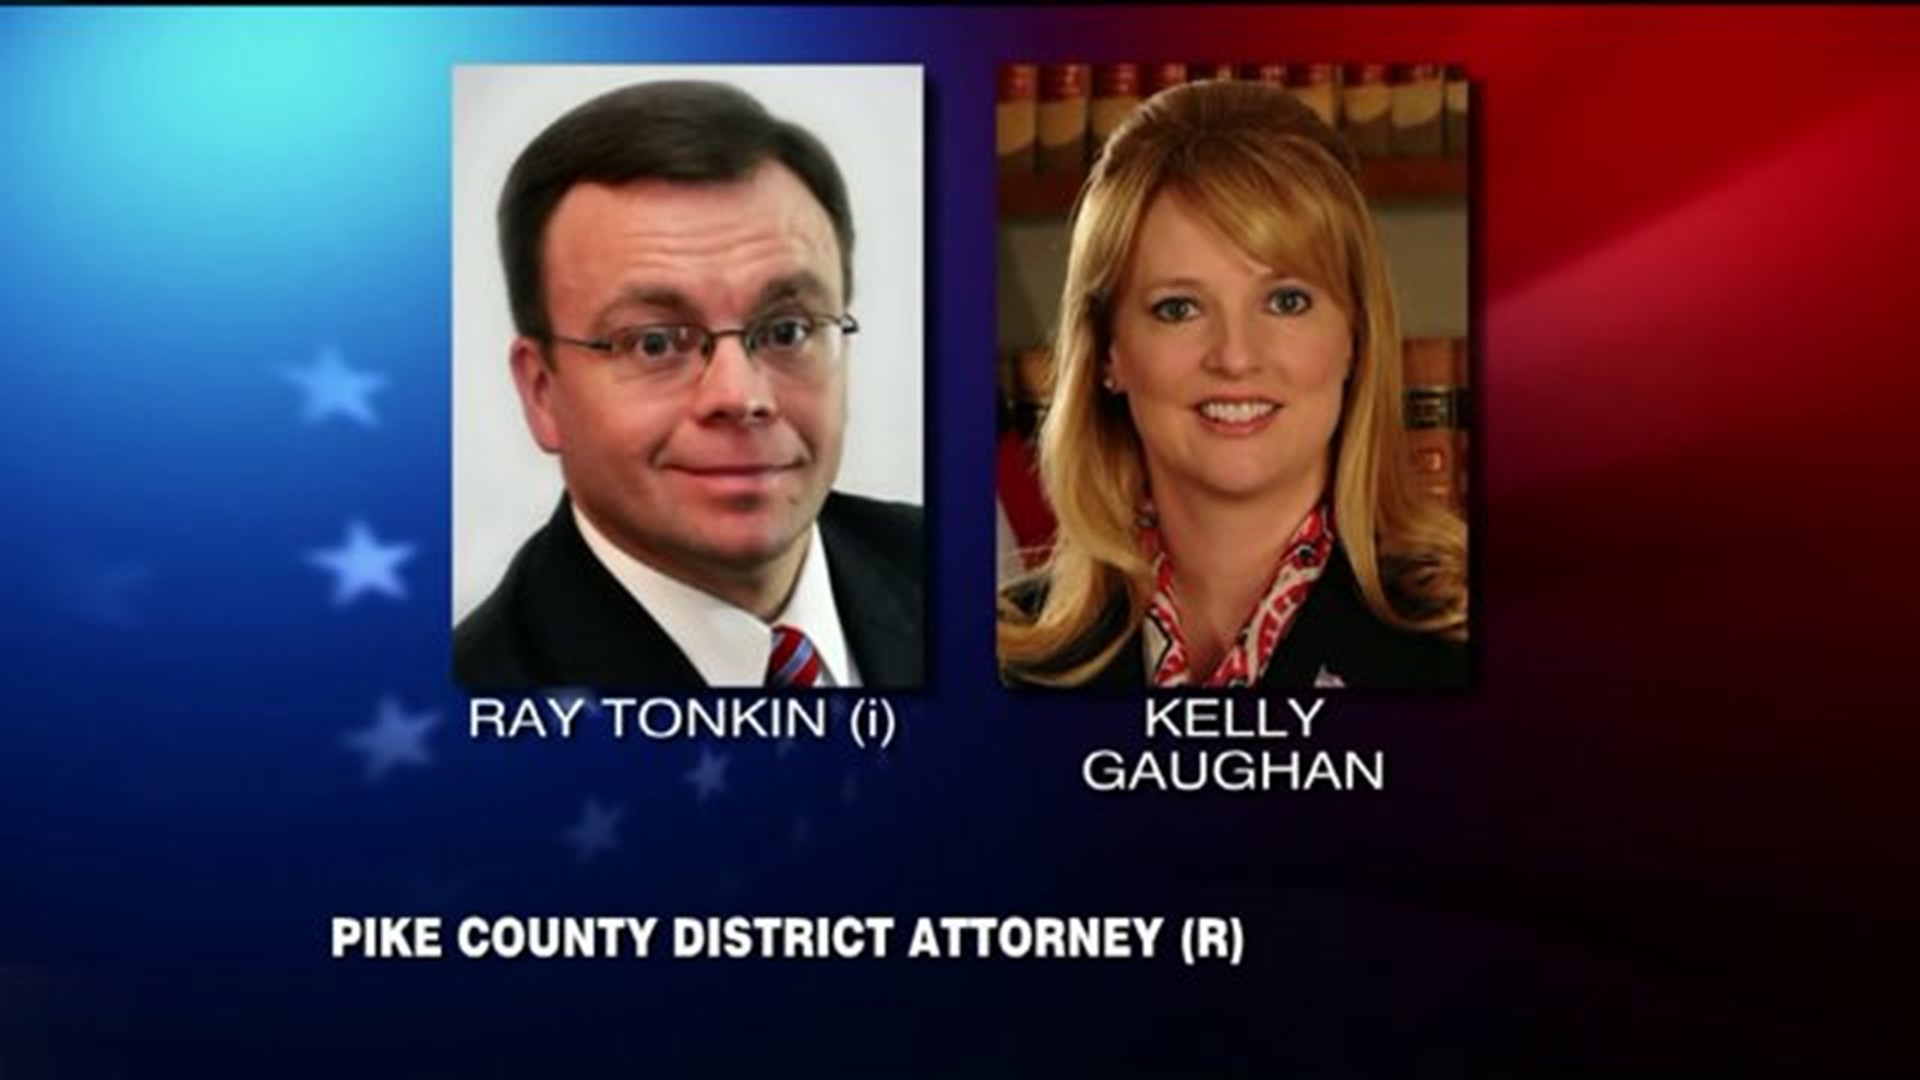 `Flurry` of Activity on Day Before Election in Pike County D.A. Race